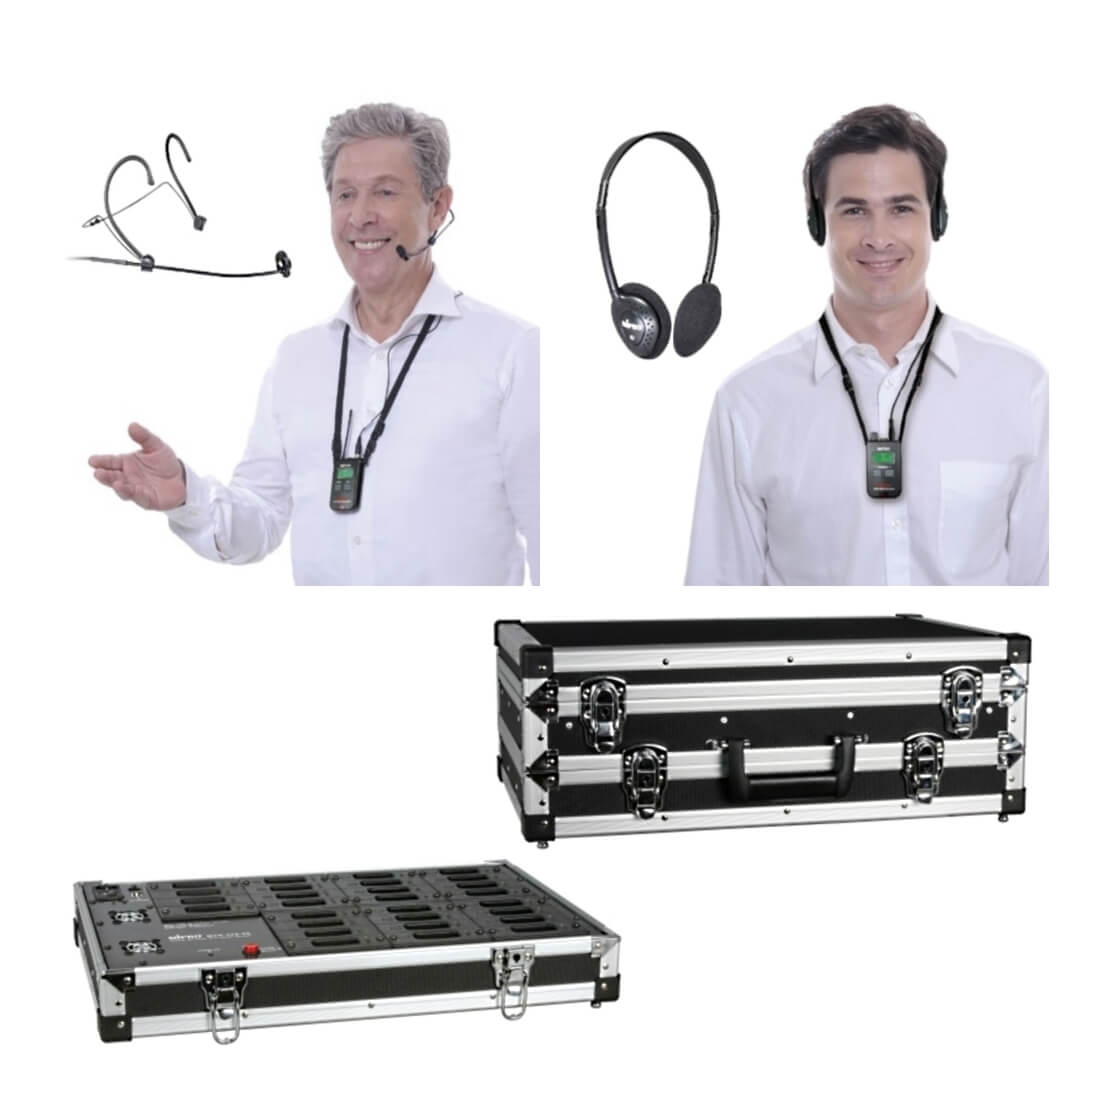 Tour Guide Custom Kit - 28 Slot Charger/Case with 2 Transmitters & 24 Receivers (2 avail slots)